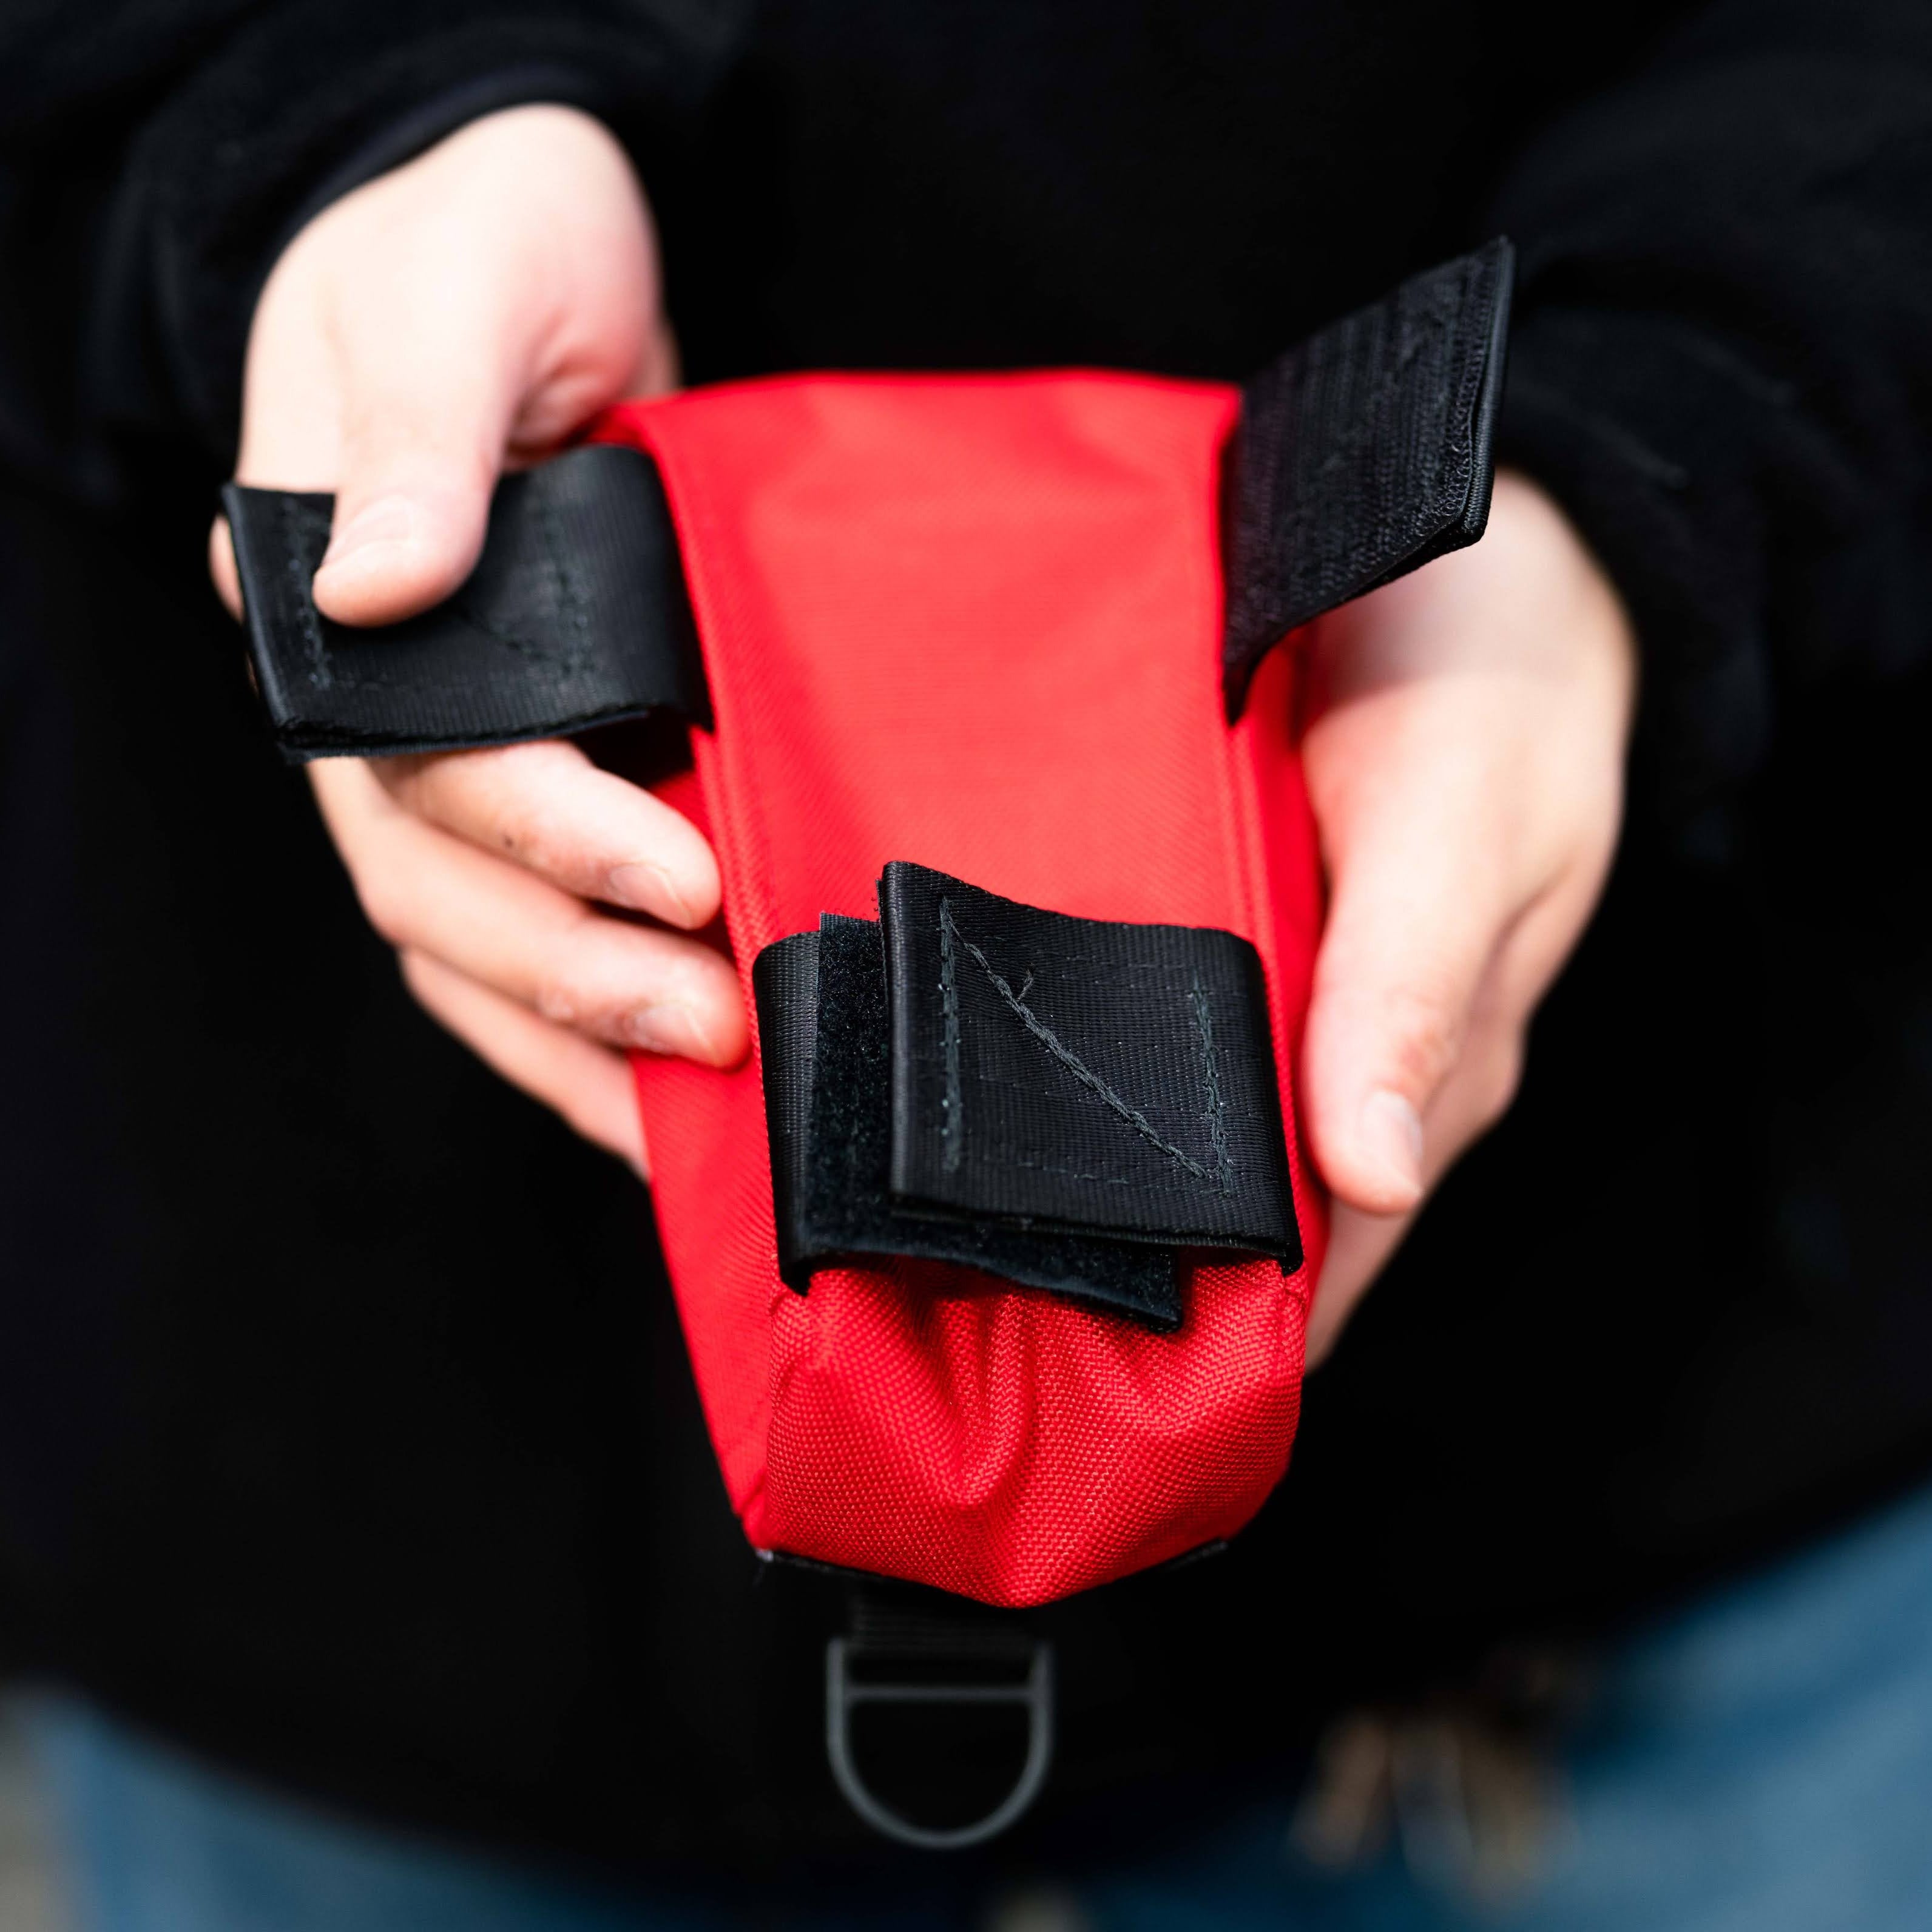 ZODIAC BAGGAGE Cell Phone Holster